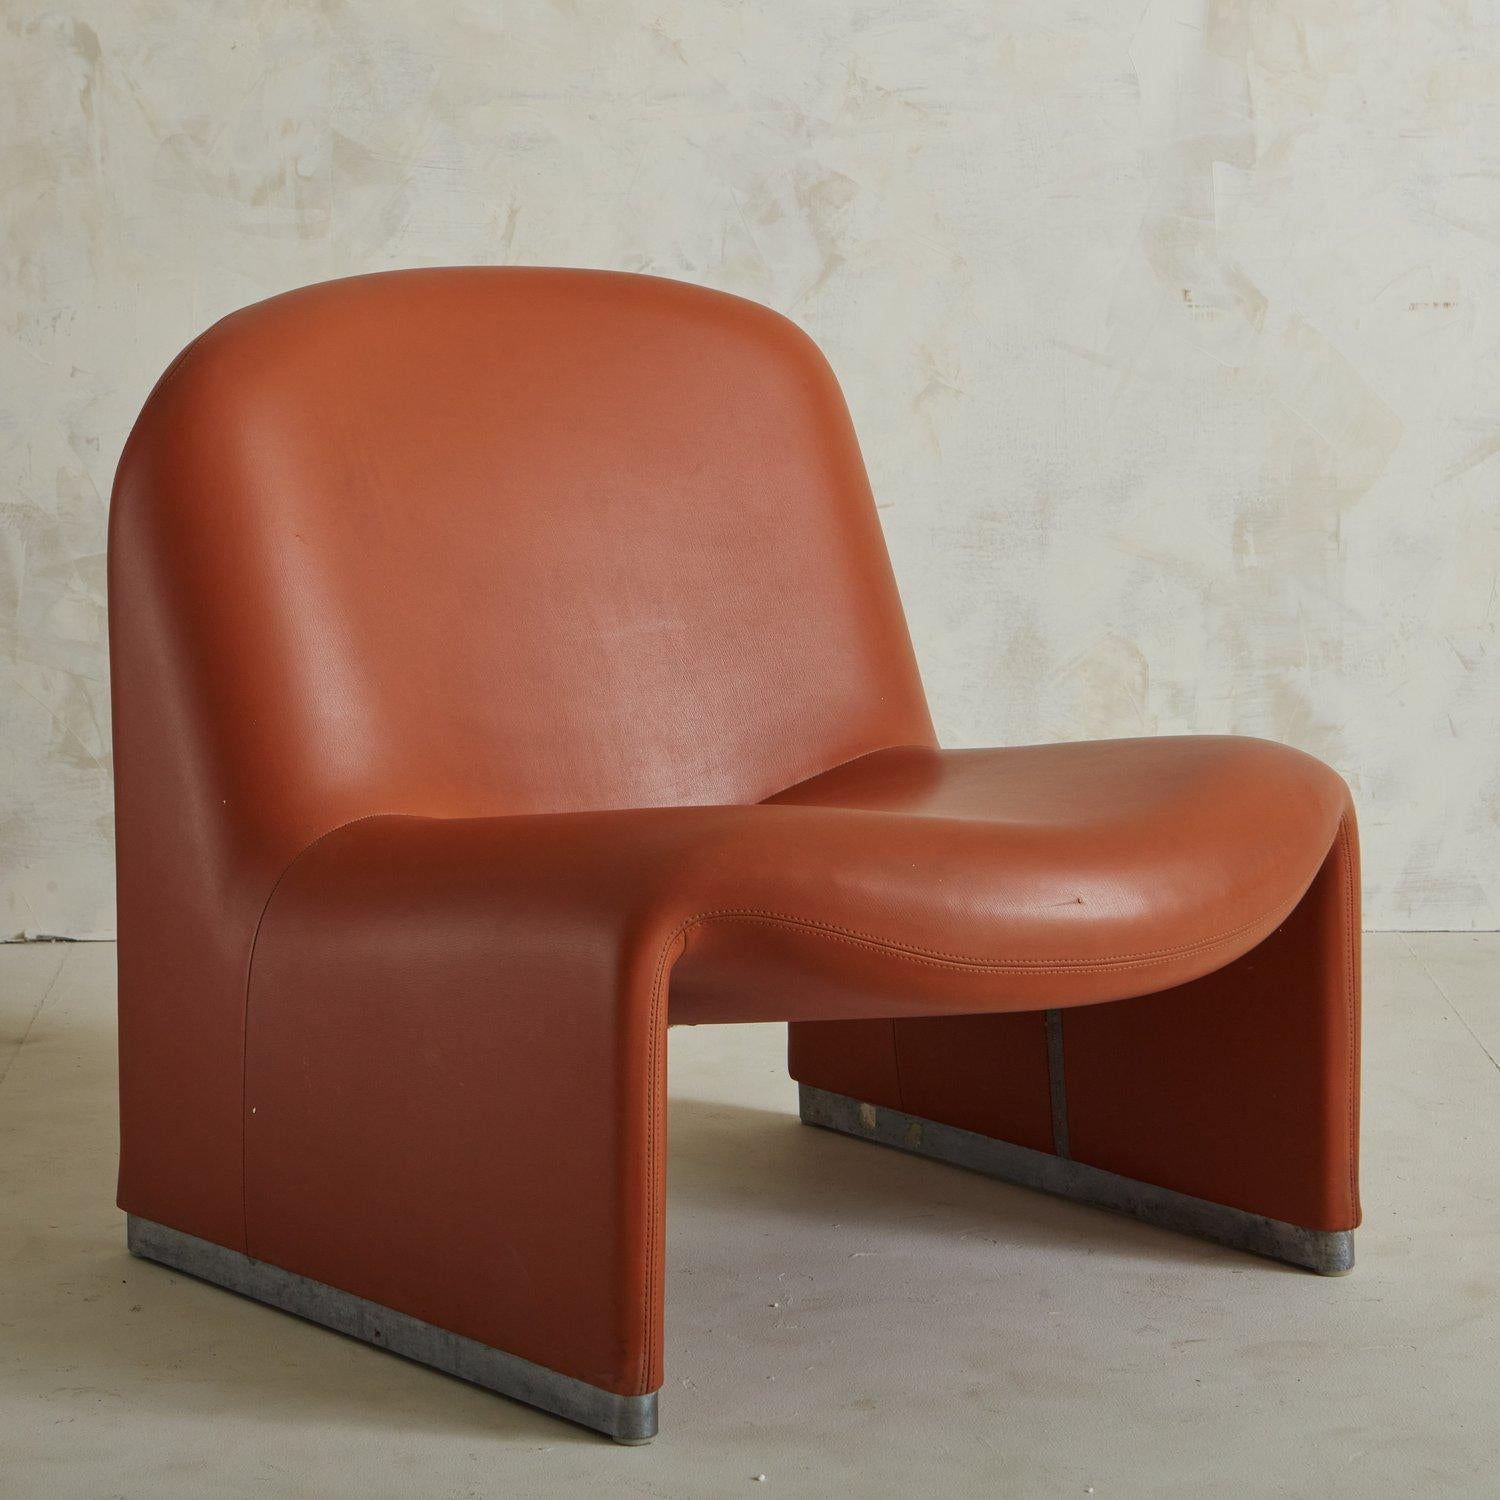 The Alky chair was designed by Giancarlo Piretti for Castelli in 1969. Sculptural, fantastic modern design - the Alky chair was exhibited with the Piretti Collection at NeoCon in 1988. This chair looks amazing from every angle and floats beautifully